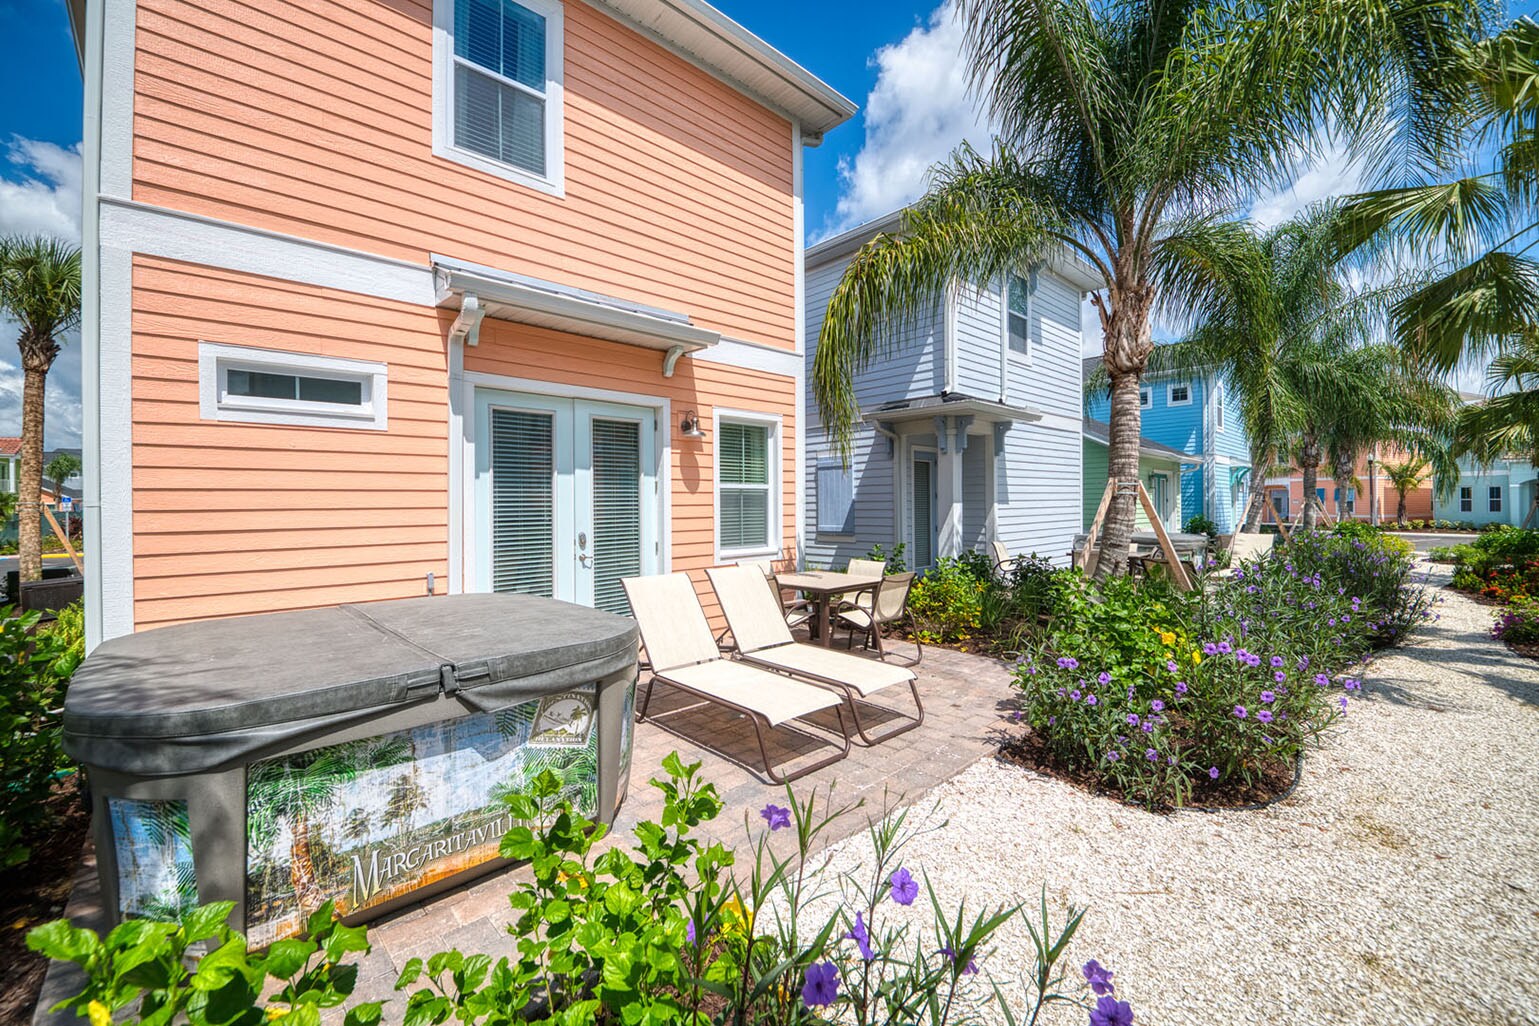 Property Image 1 - Tropical Oasis Cottage near Disney with Private Hot Tub & Margaritaville Resort Access - 3021LA